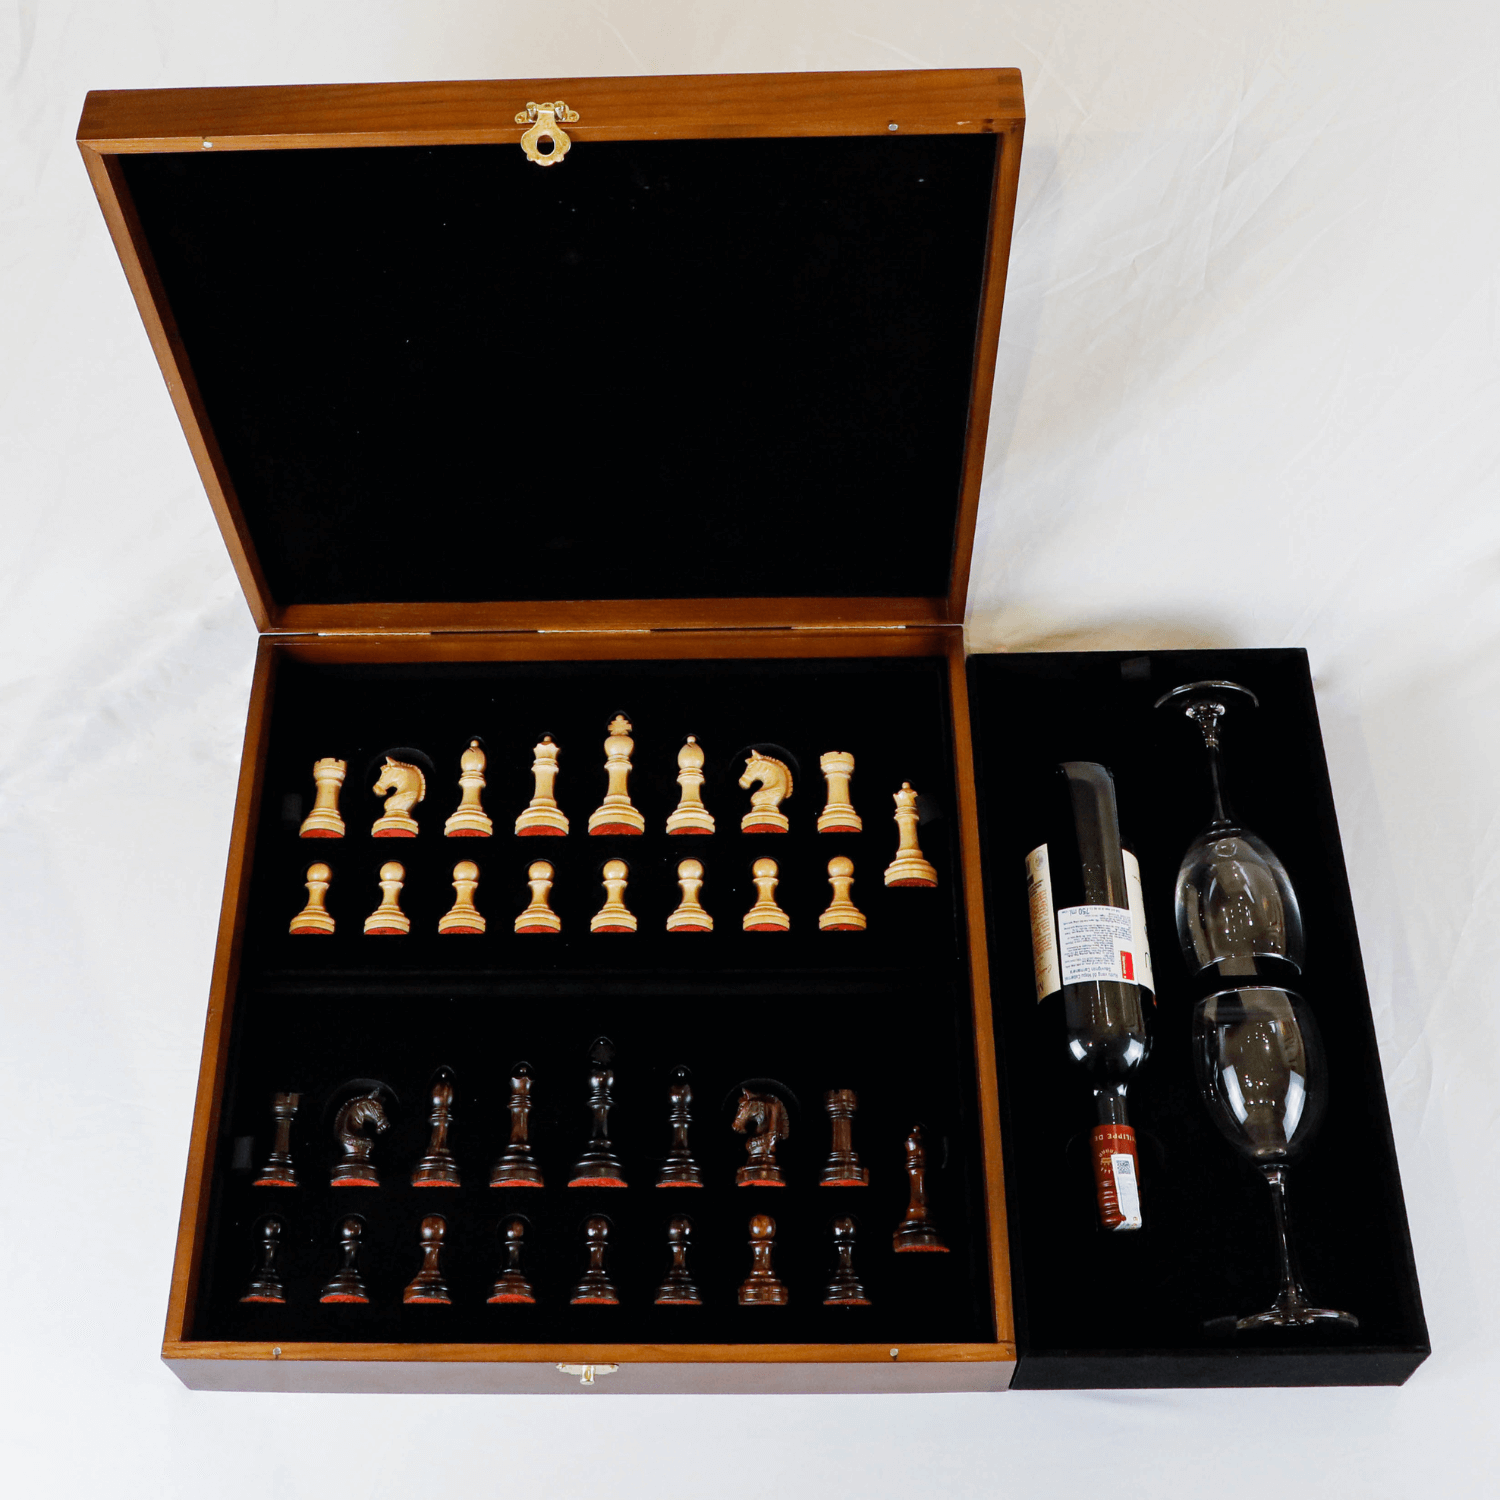 Premium Chess Gift Set By Henry Le - An Intellectual Gift